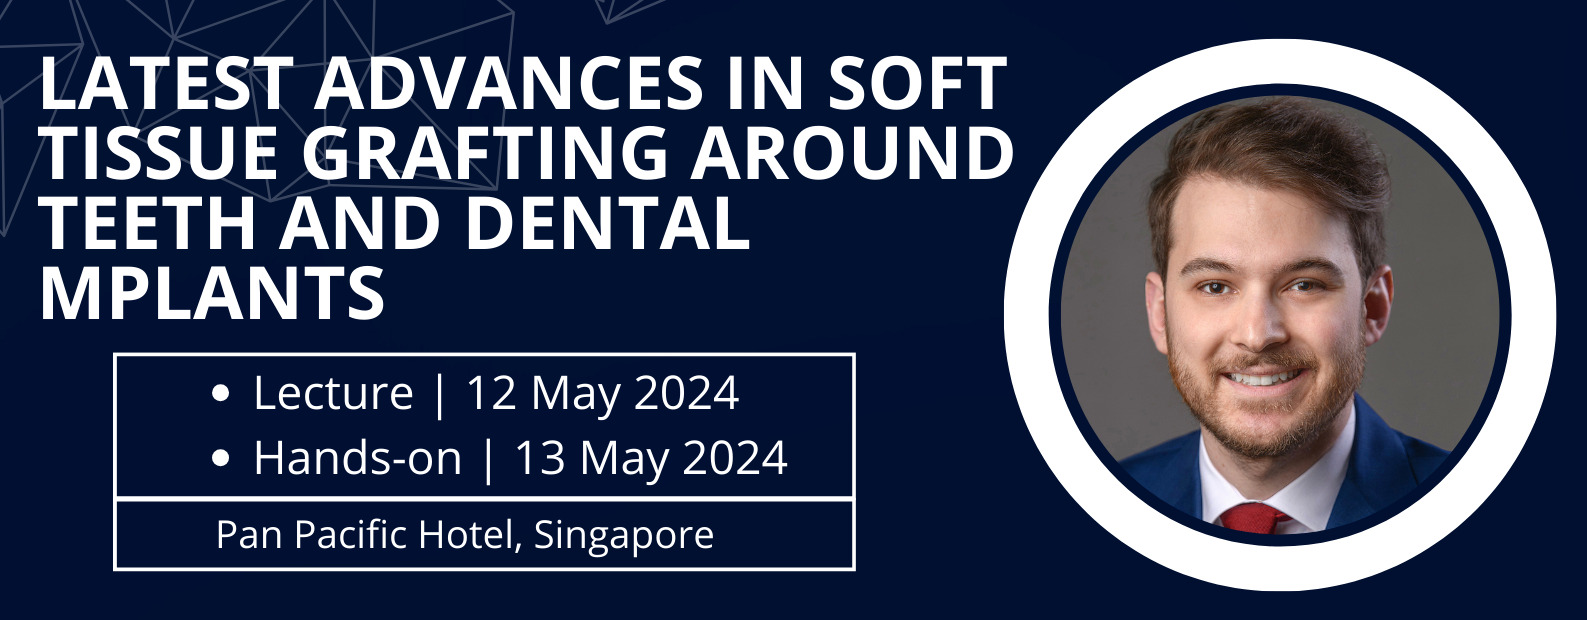 Latest Advances in Soft tissue Grafting around Teeth and Dental Implants